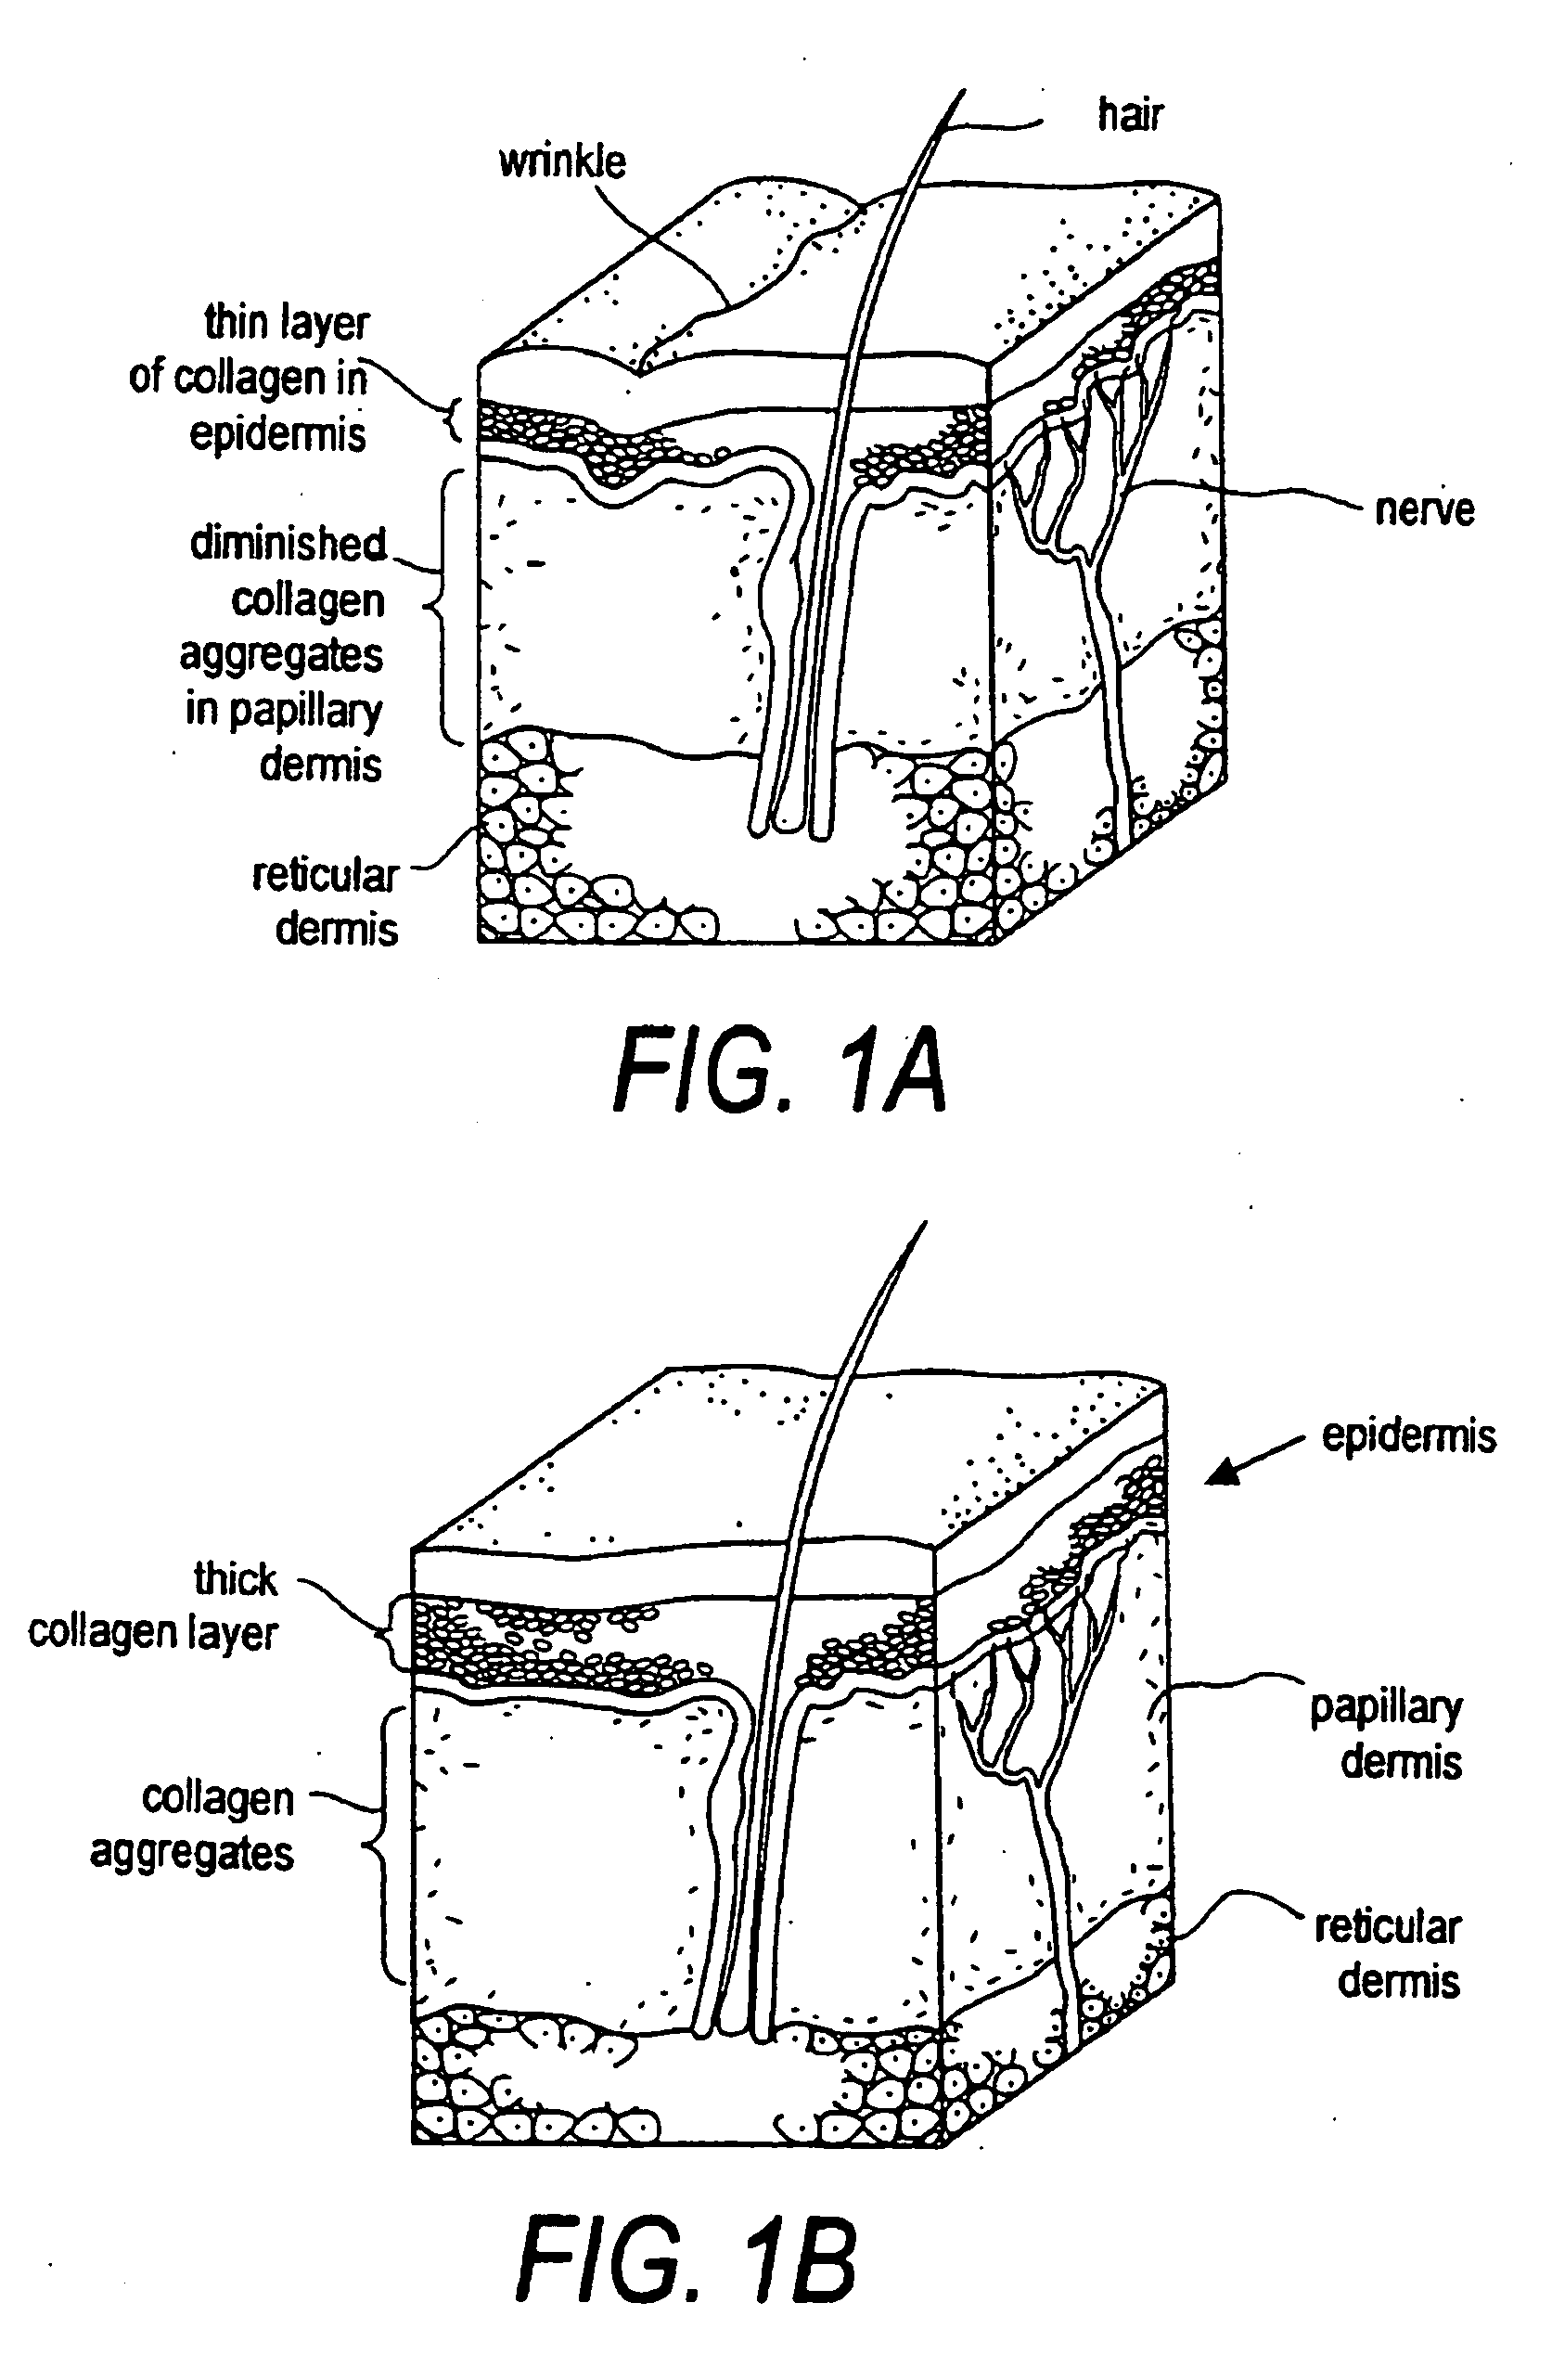 Instruments and techniques for controlled removal of epidermal layers